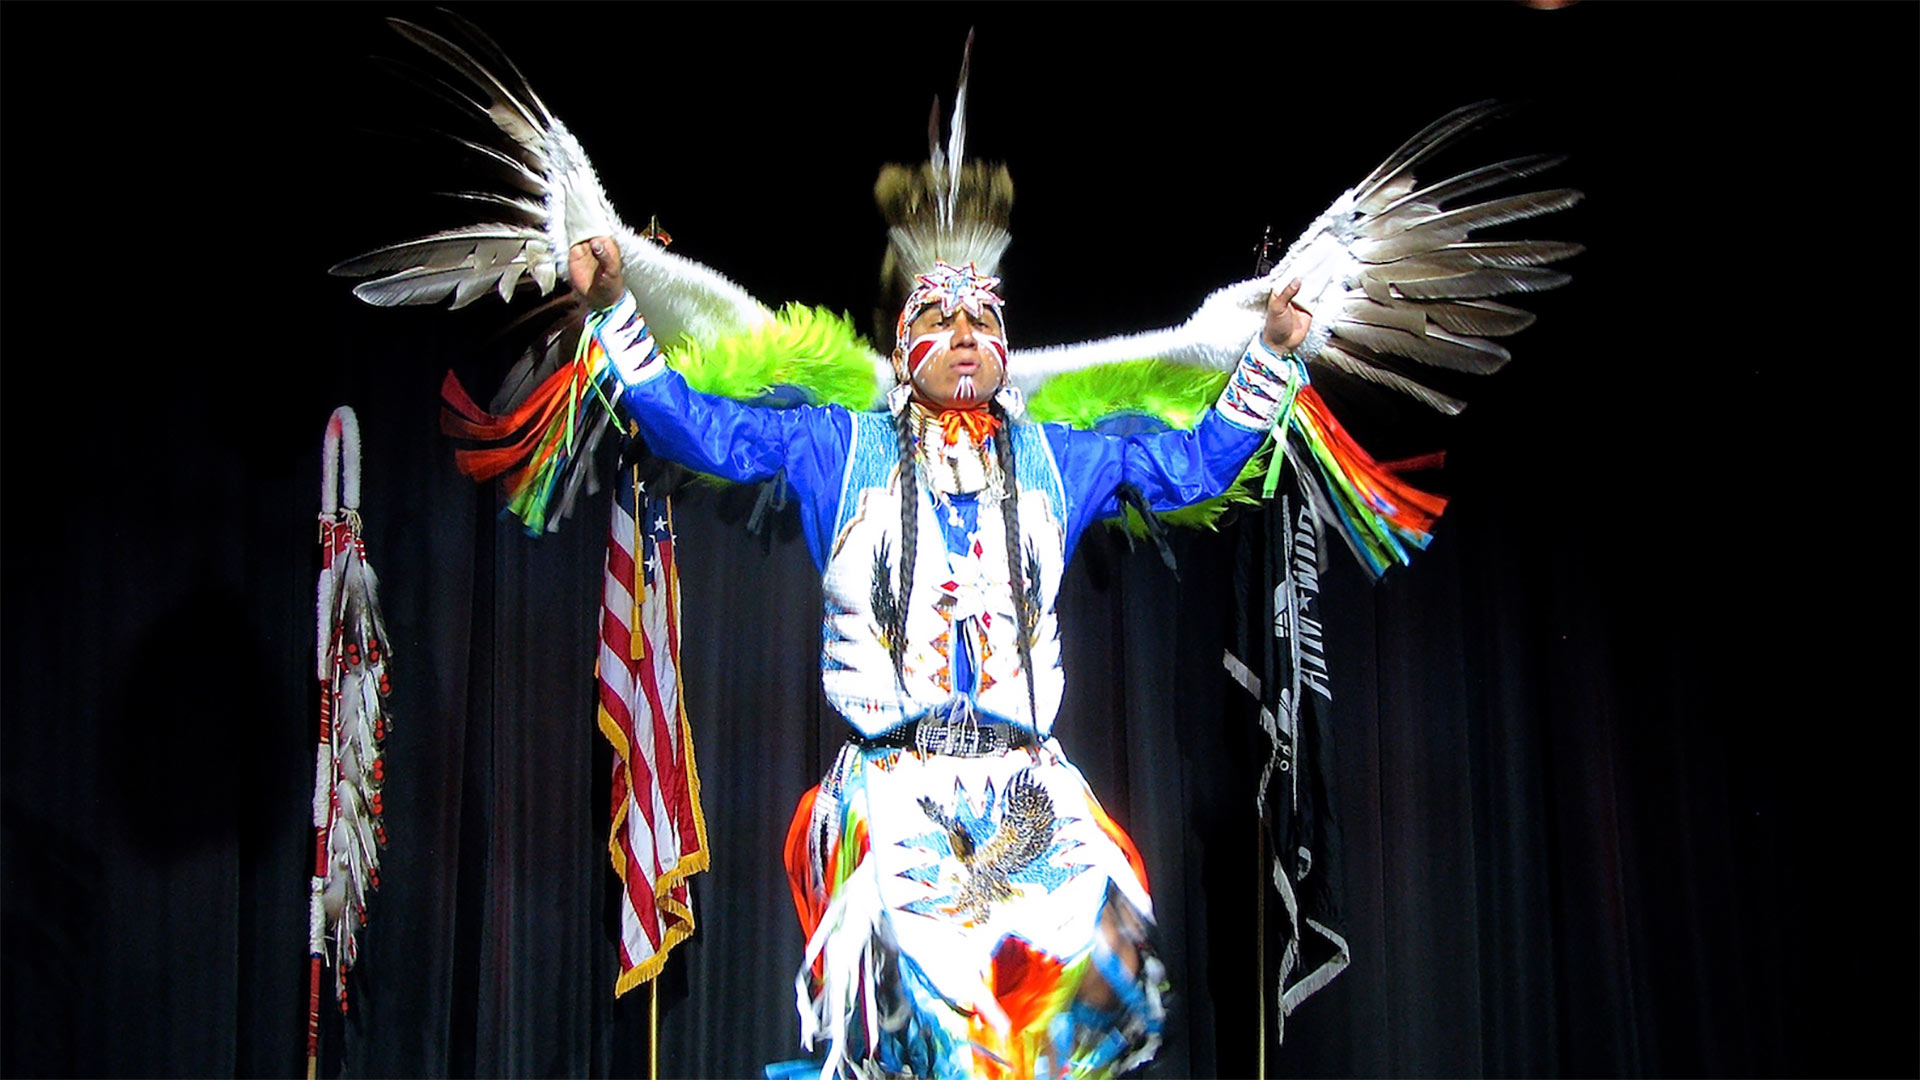 Dancer on stage in colorful dance regalia, with feathers on his arms